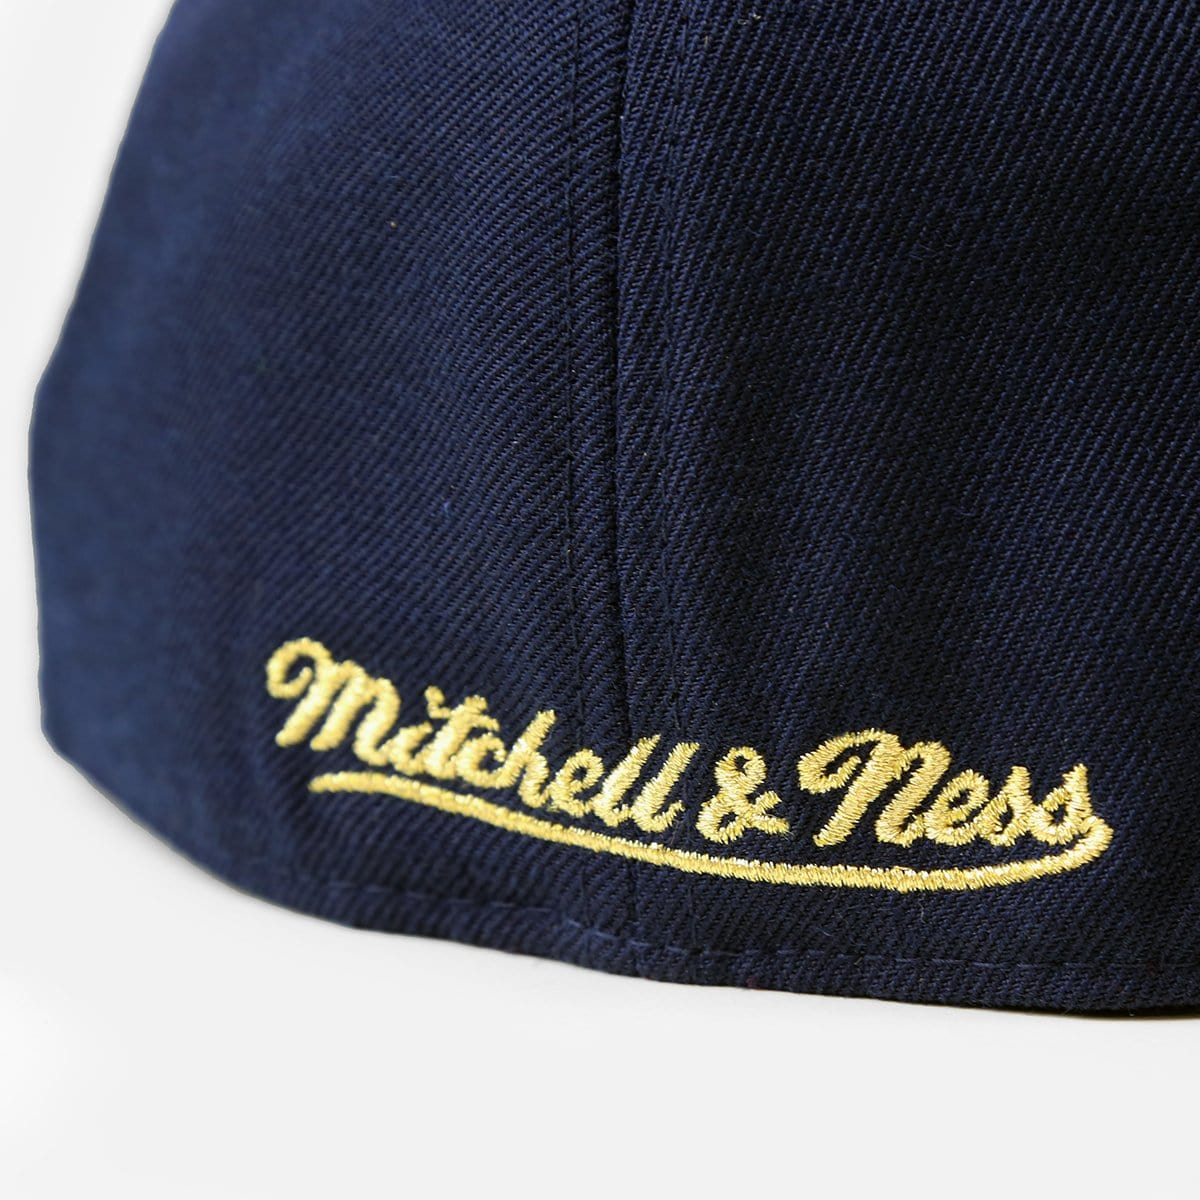 RUVilla.com is where to buy the Mitchell & Ness Philadelphia 76ers USA 2 Tone Fitted Hat (Navy/Gold-Red)!